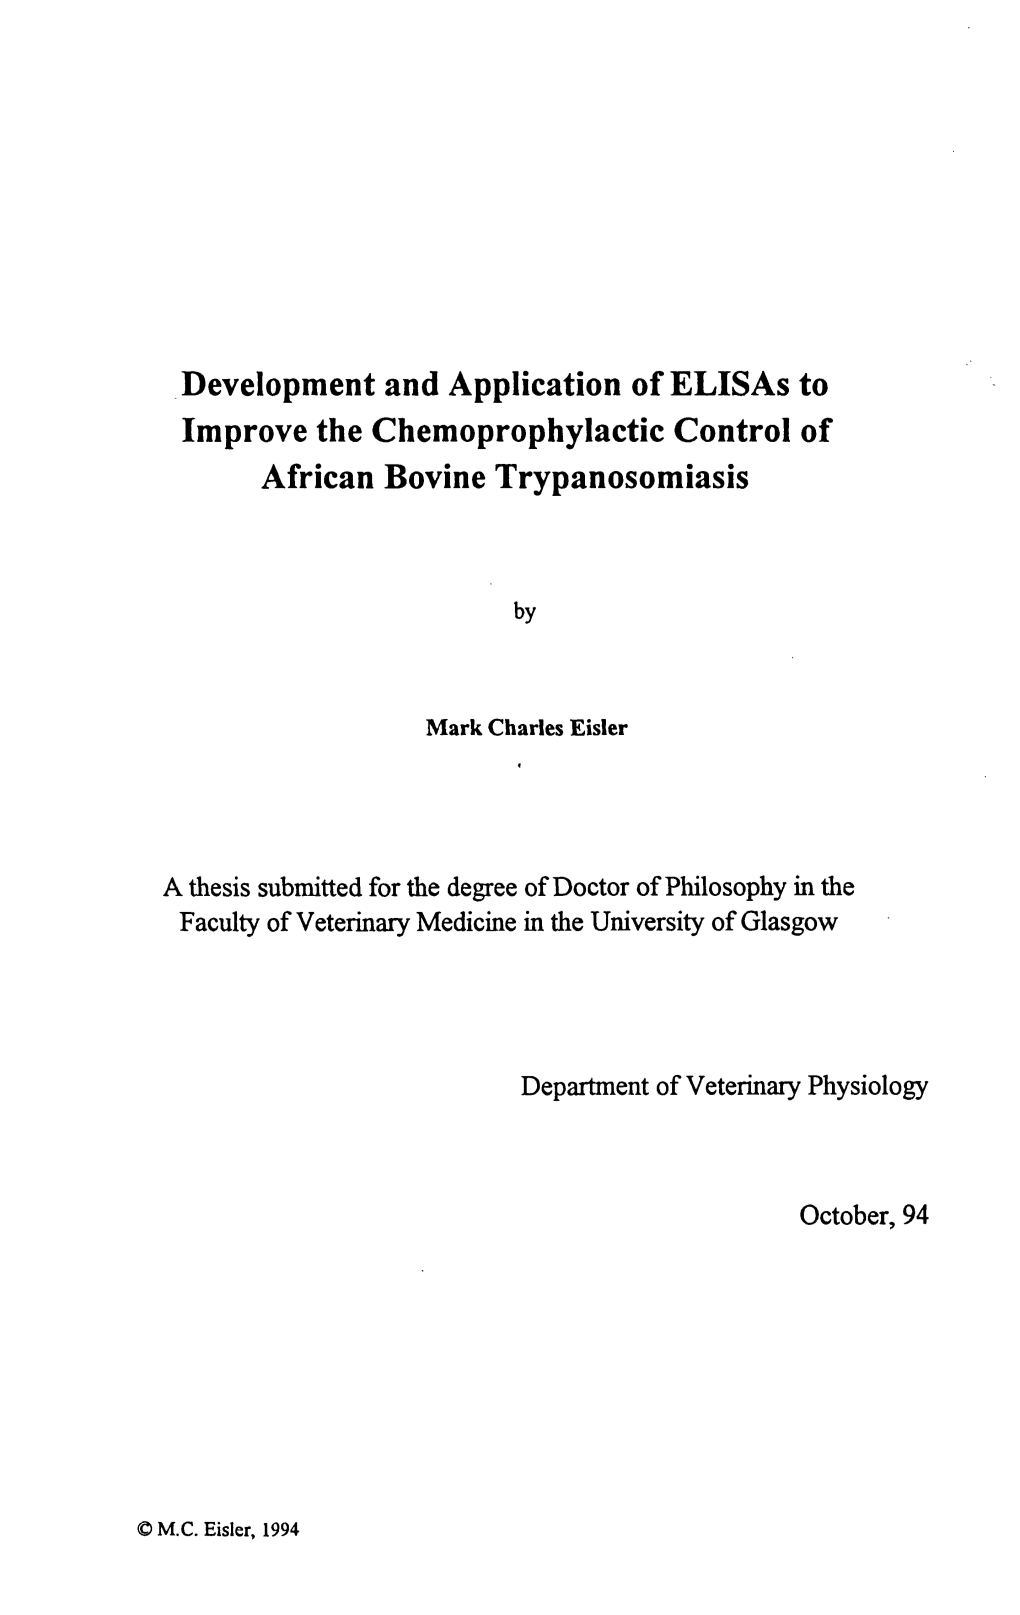 Development and Application of Elisas to Improve the Chemoprophylactic Control of African Bovine Trypanosomiasis